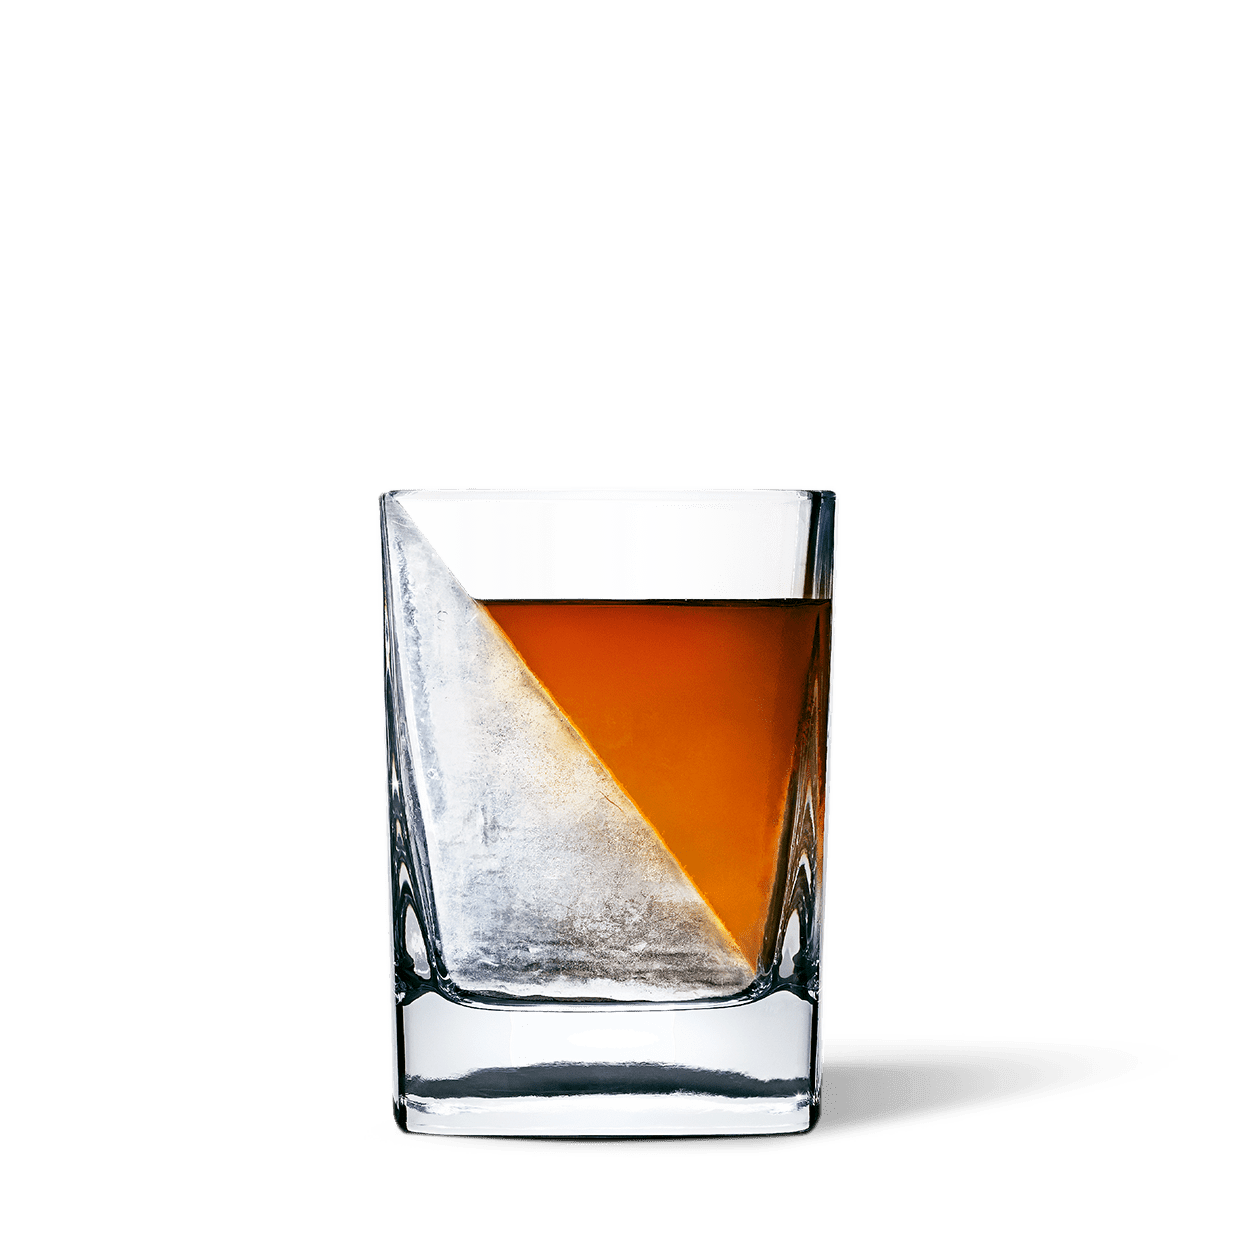 a whiskey cup made from high-quality transparent special glass that during freezing, ice forms a wedge shape on one side of the glass so when pouring a drink, the wedge melts slowly to help retain the drink's full flavor